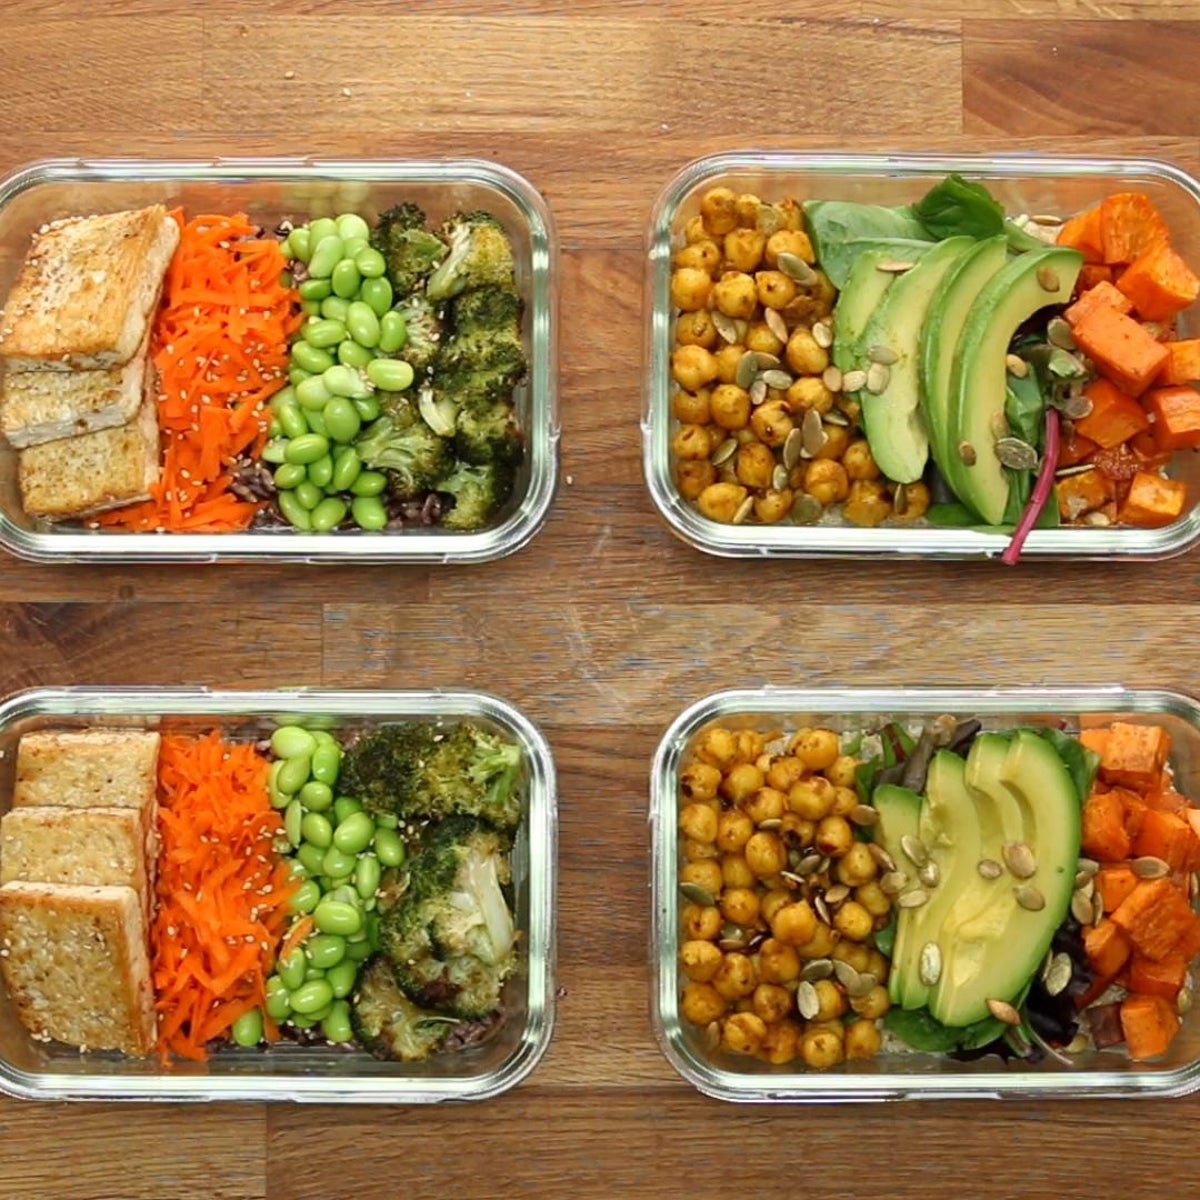 How to make a lunch bowl - The Washington Post